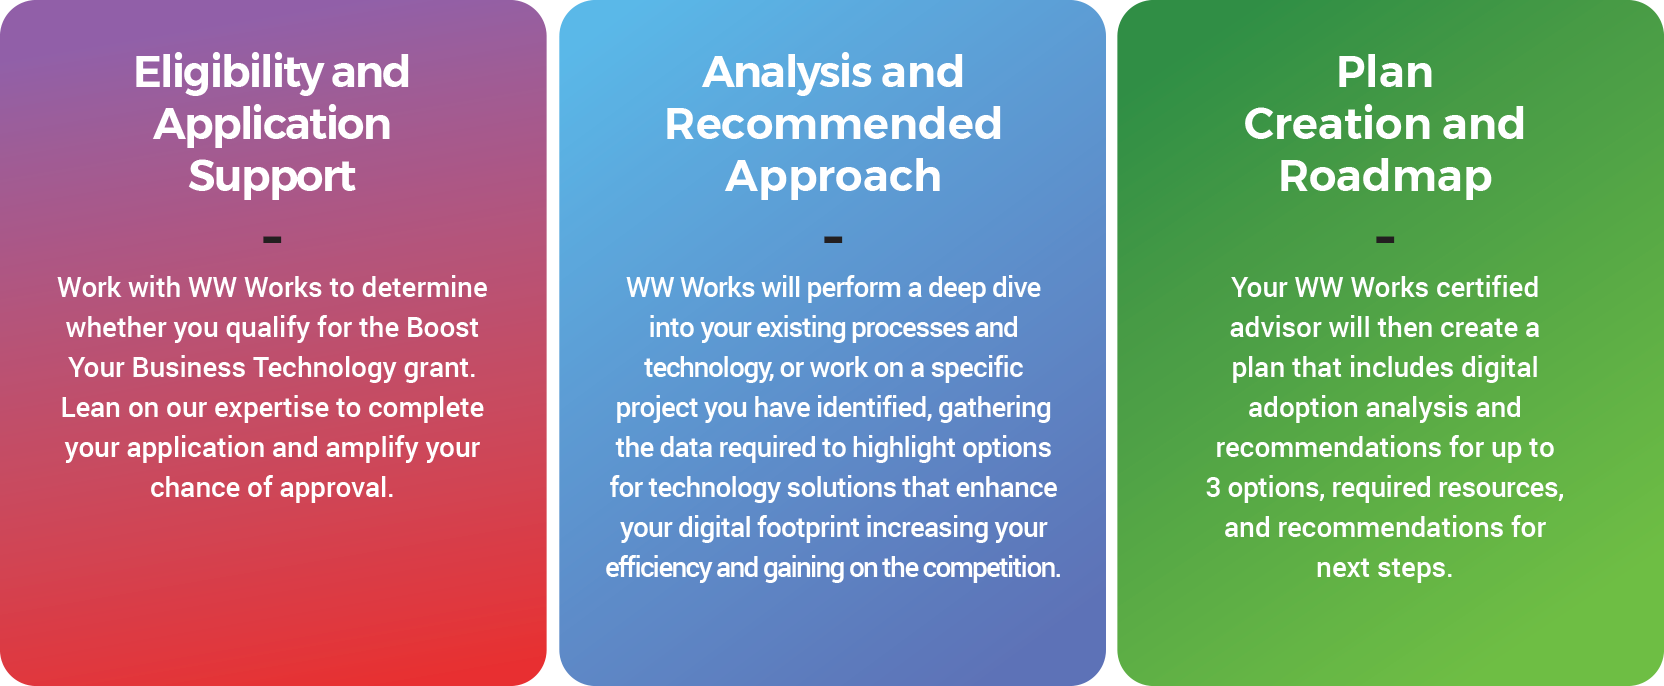 Eligibility and Application Support - Work with WW Works to determine whether you qualify for the Boost Your Business Technology grant. Lean on our expertise to complete your application and amplify your chance of approval. Analysis and Recommended Approach - WW Works will perform a deep dive into your existing processes and technology, or work on a specific project you have identified, gathering the data required to highlight options for technology solutions that enhance your digital footprint increasing your efficiency and gaining on the competition. Plan Creation and Roadmap - Your WW Works certified advisor will then create a plan that includes digital adoption analysis and recommendations for up to 3 options, required resources, and recommendations for next steps.